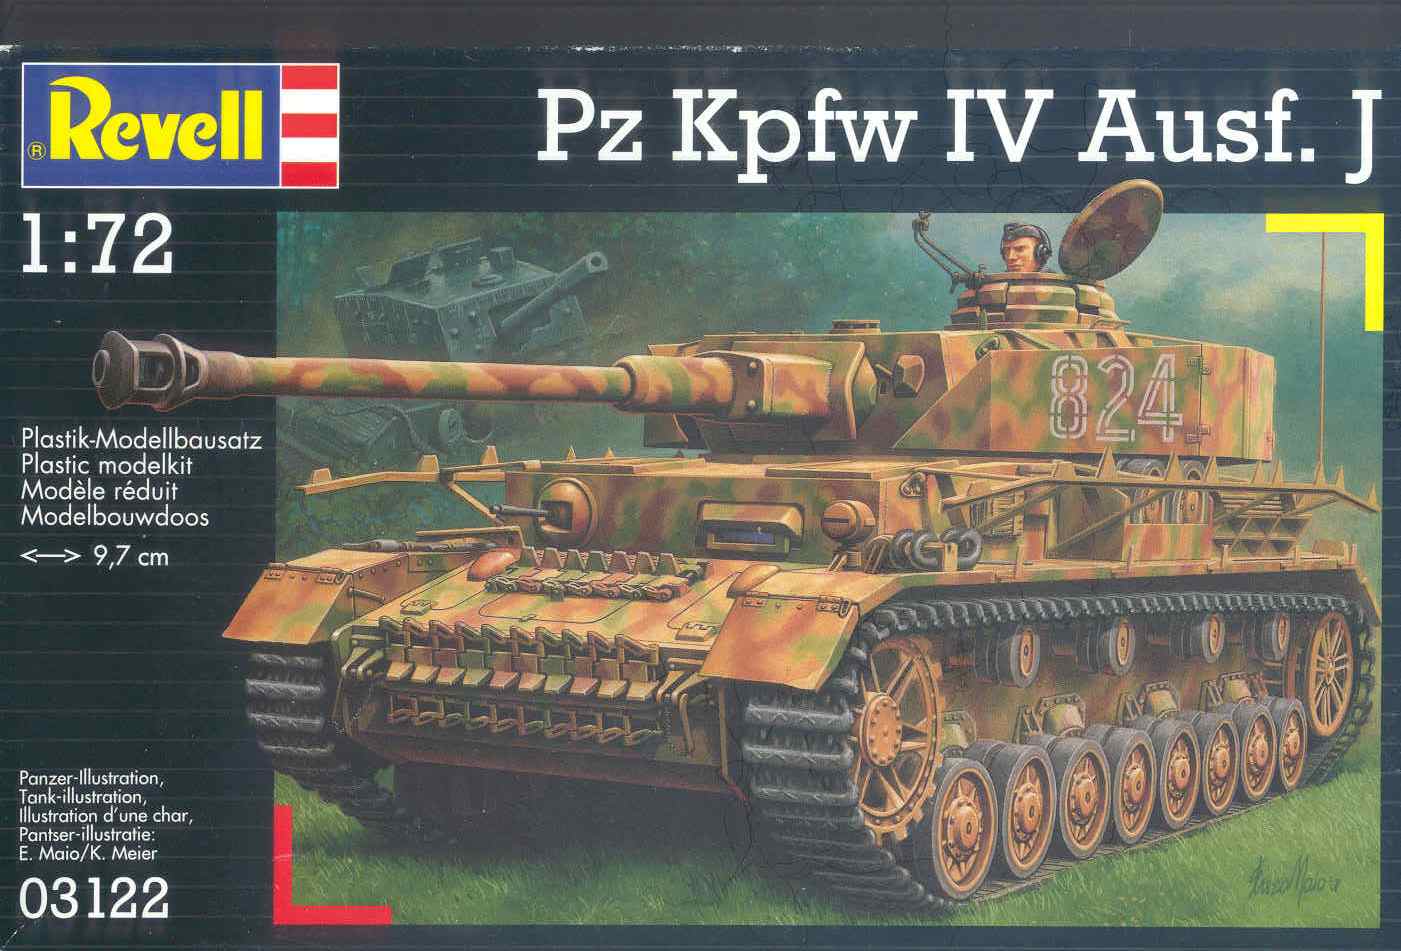 Armourfast 1/72 scale German Panzer IV G-contient 2 models kits 